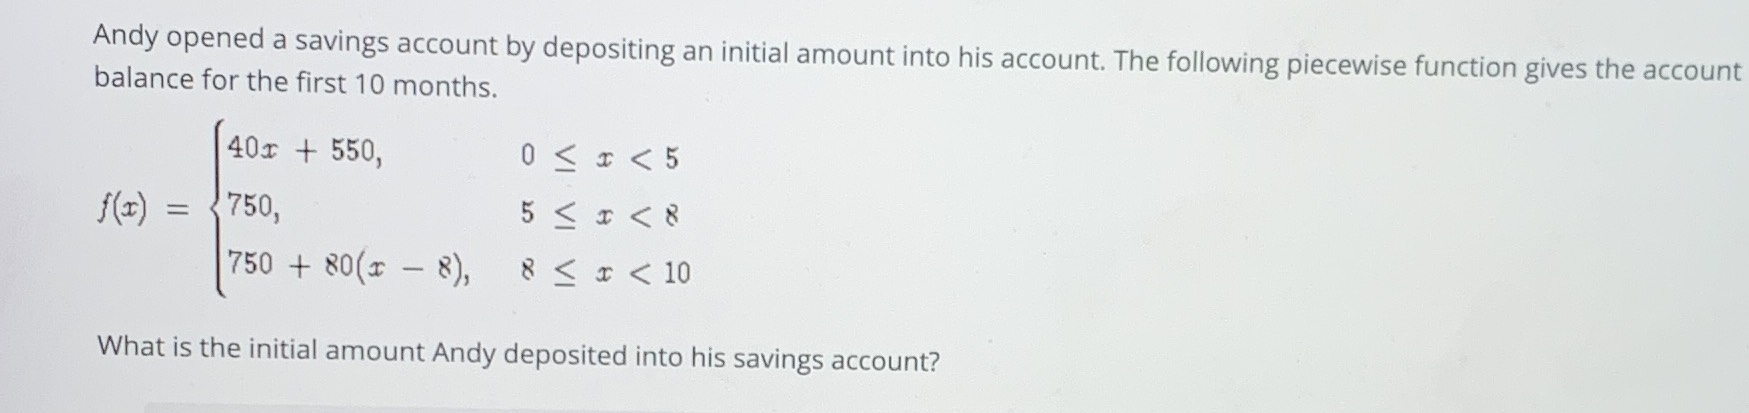 Andy opened a savings account by depositing an ini...